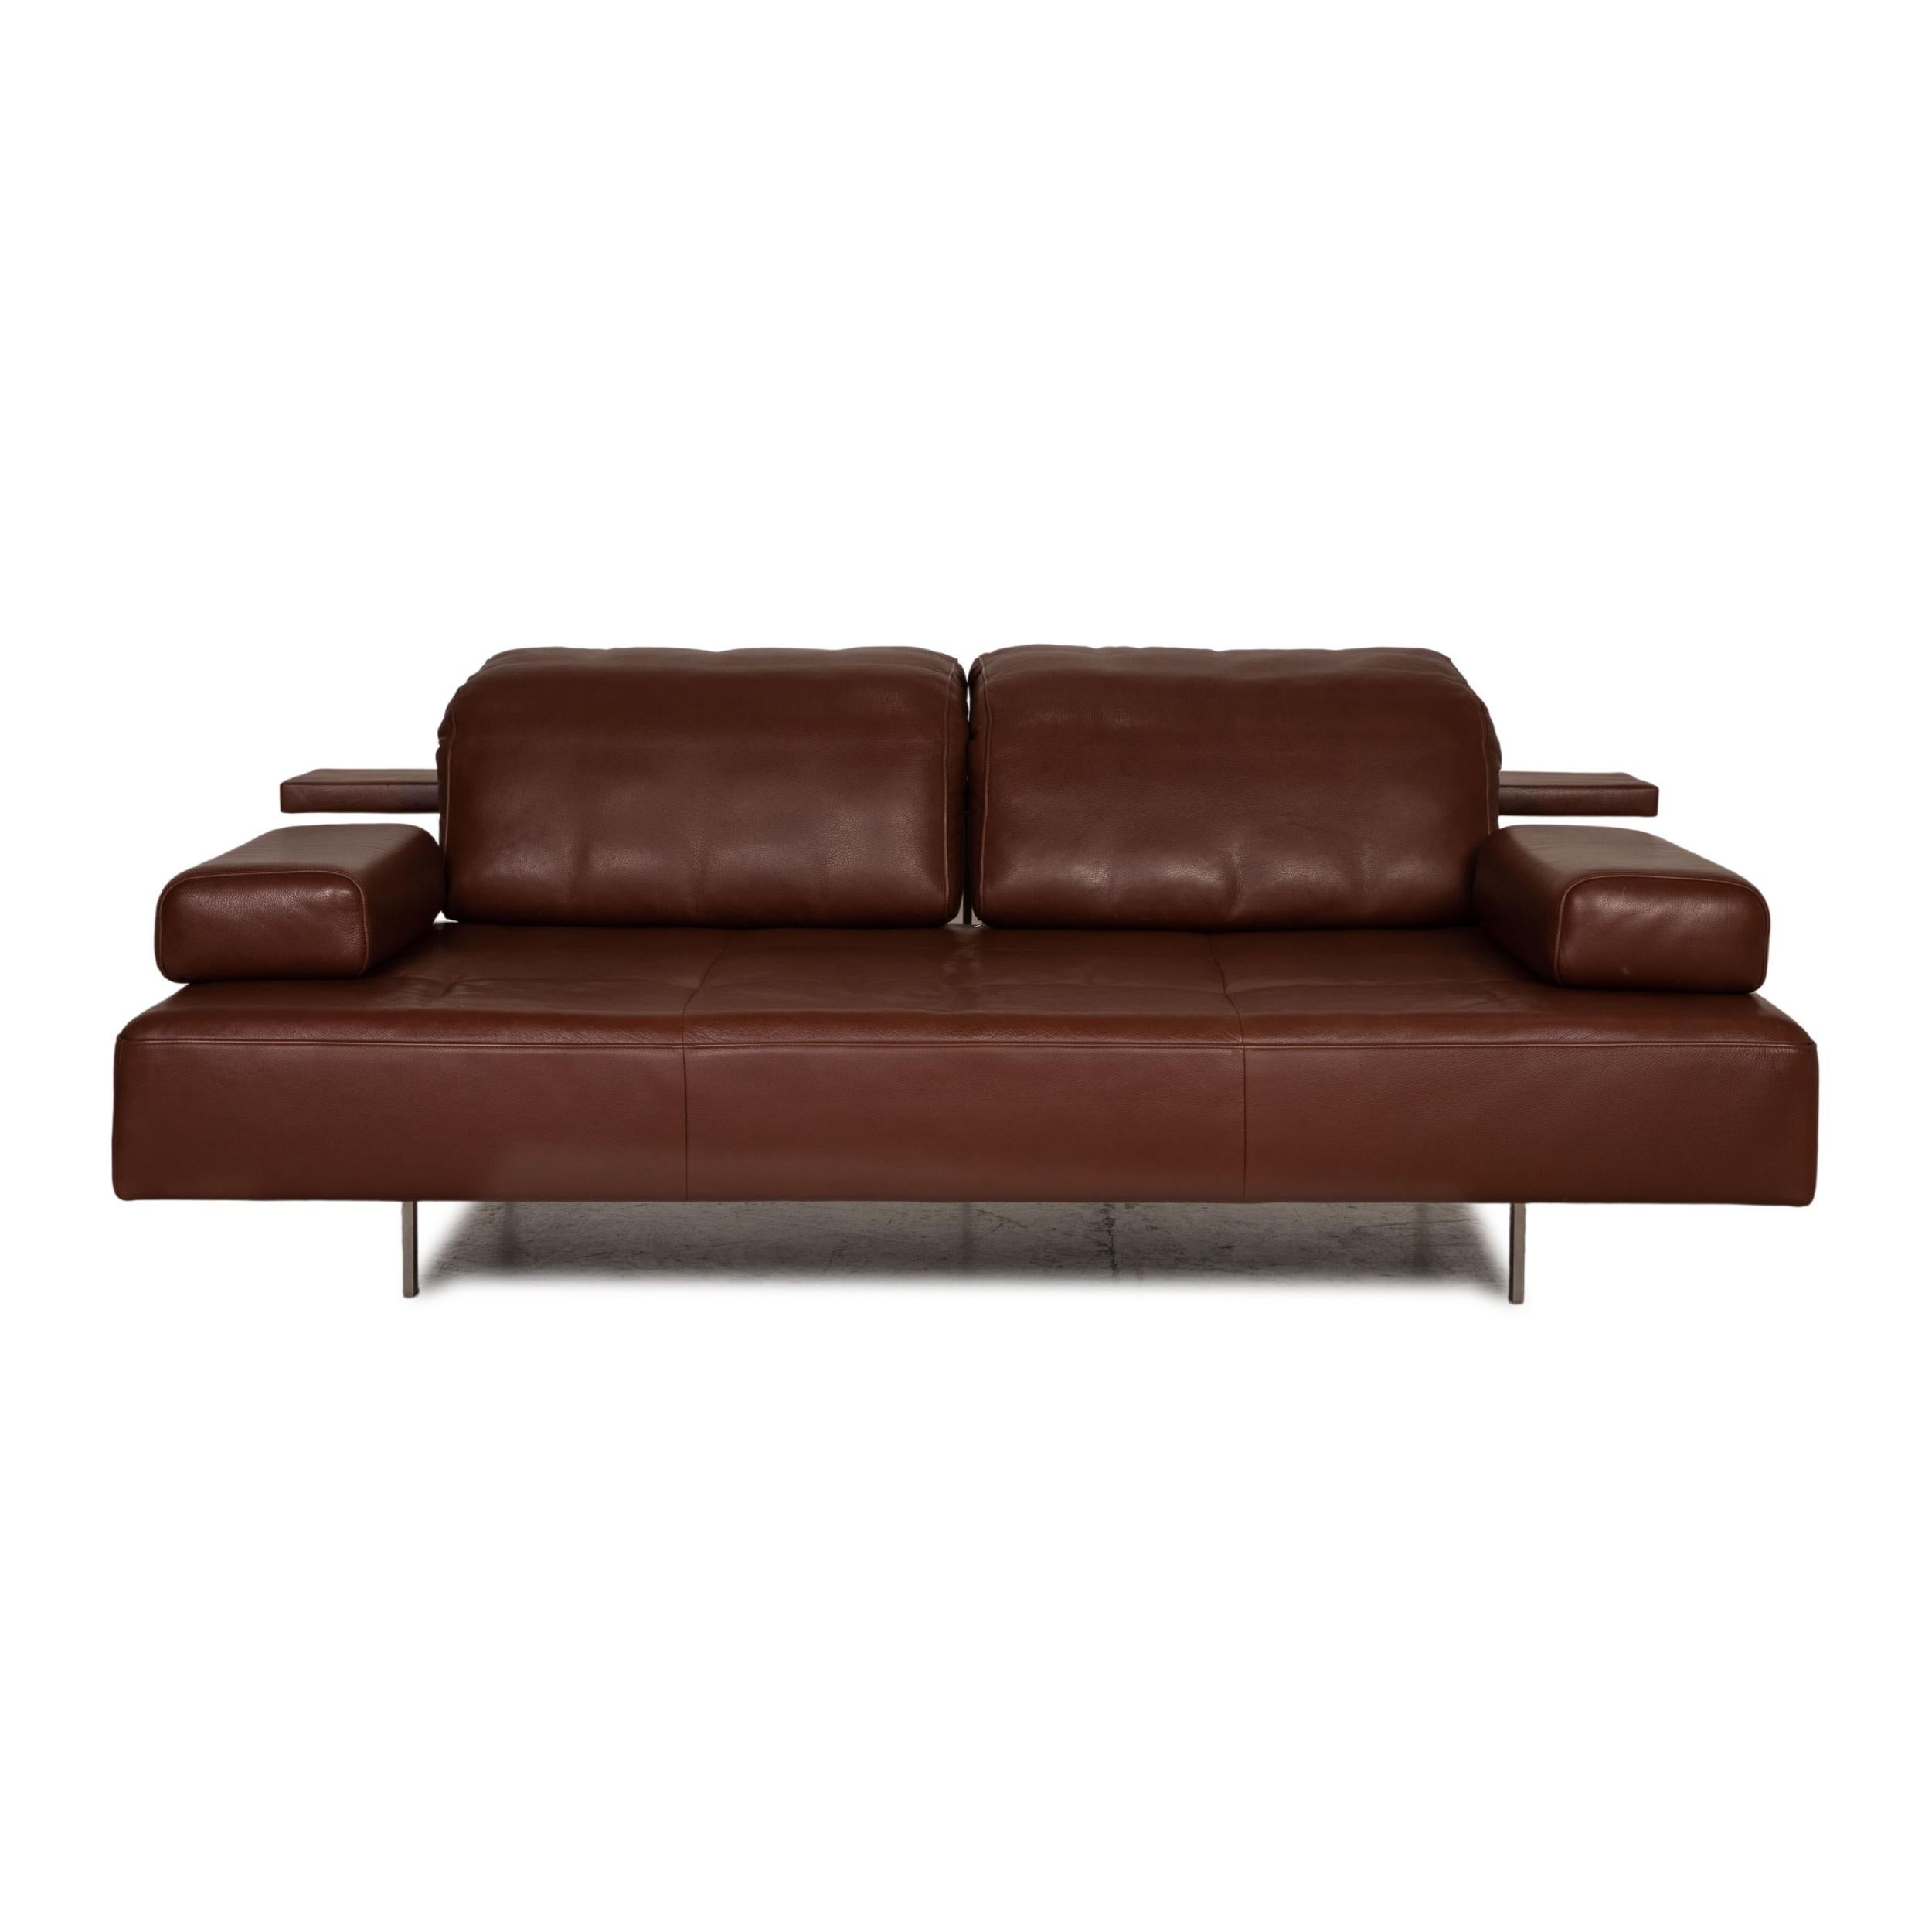 Modern Rolf Benz Dono Leather Sofa Brown Three-Seater Couch Function For Sale